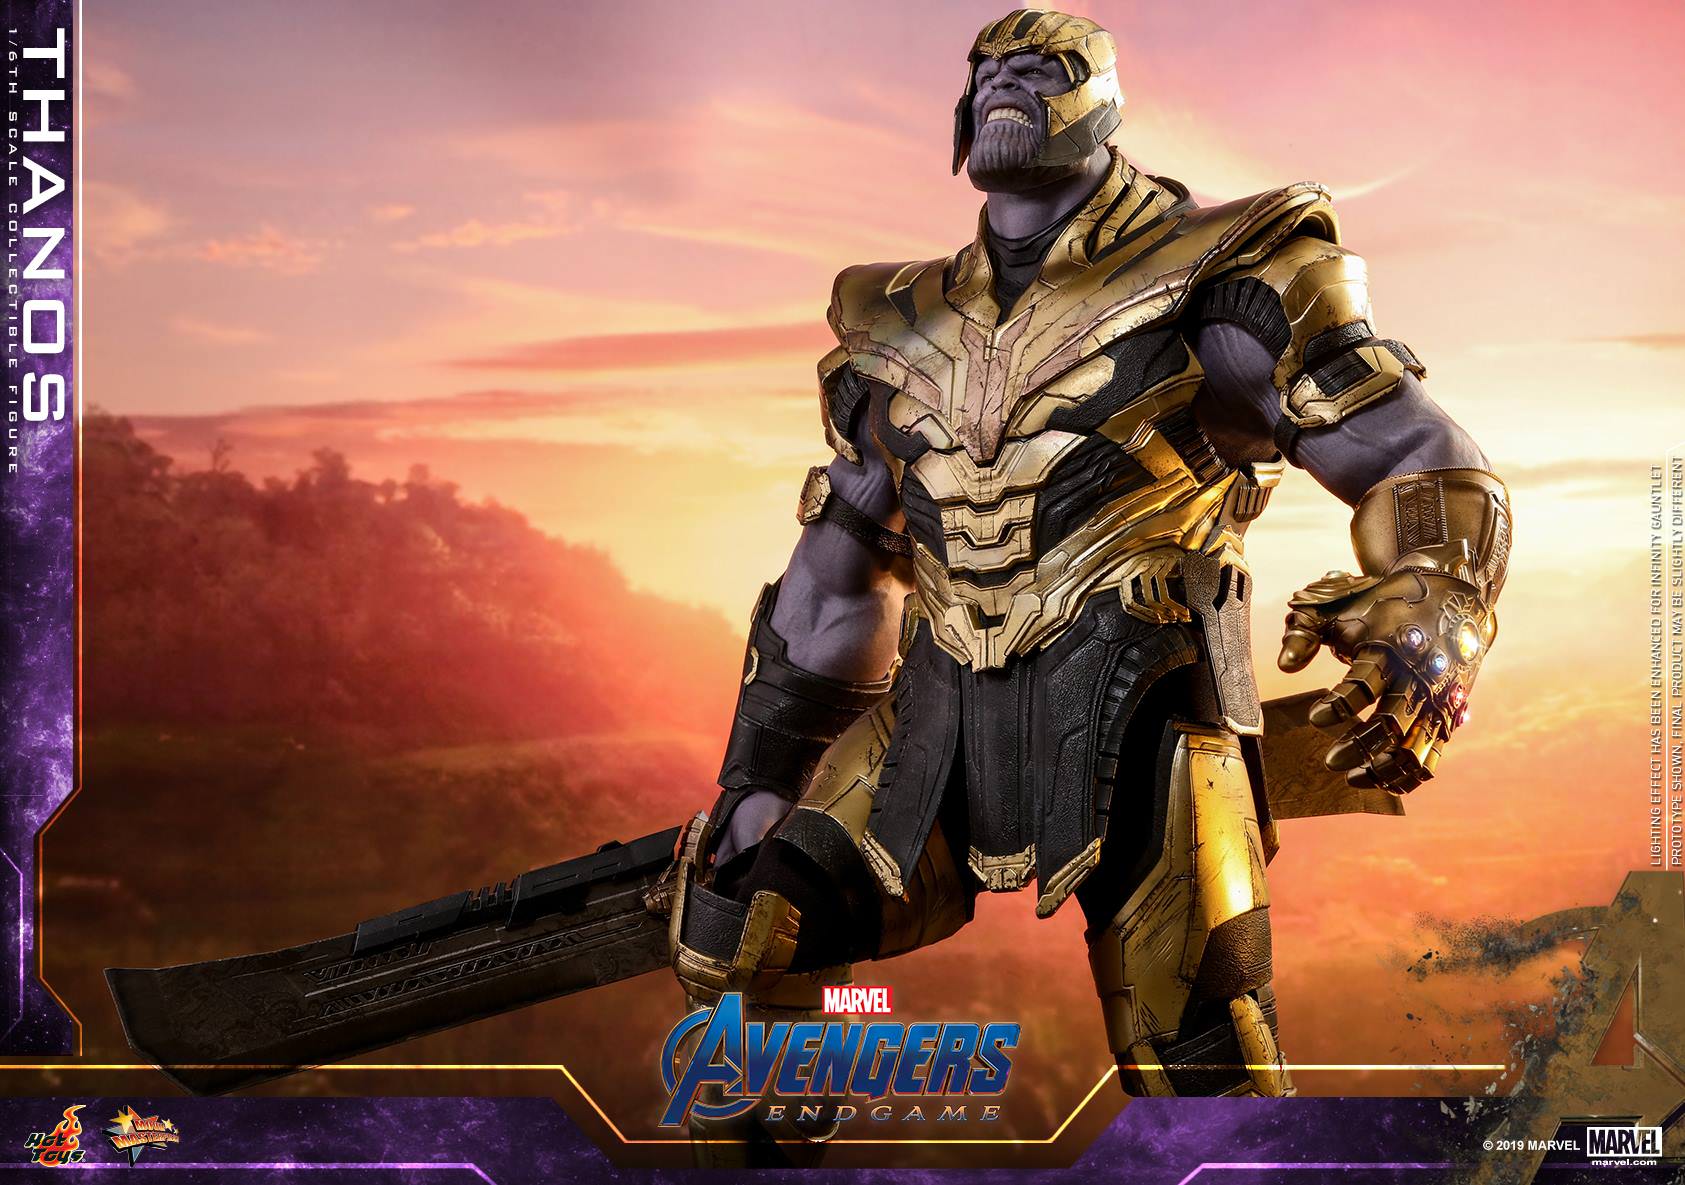 HOT TOYS MARVEL  AVENGERS ENDGAME THANOS COLLECTIBLE FIGURE 1/6TH SCALE - MMS529 - Anotoys Collectibles